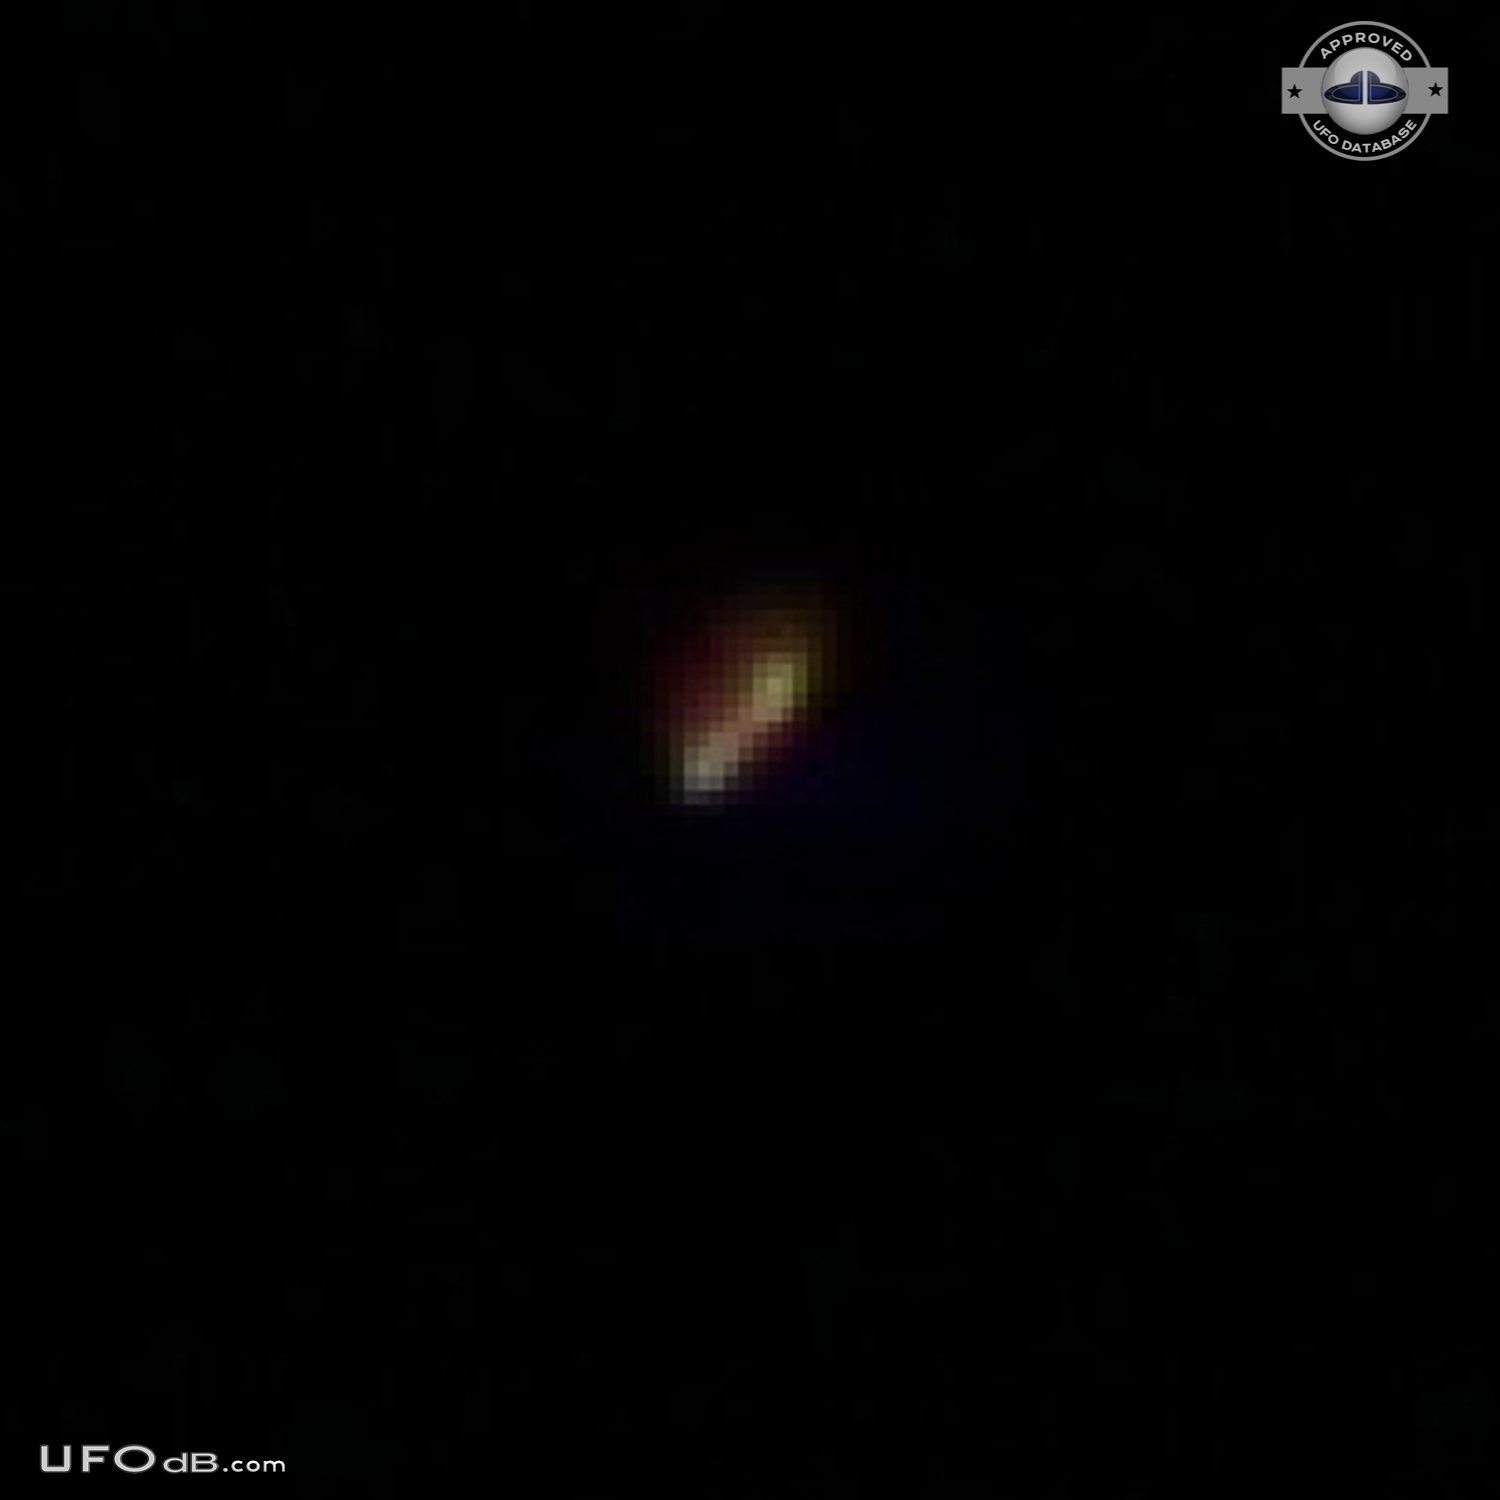 Bright mufti-colored flashing pulsating UFO on pictures - Florida 2012 UFO Picture #524-6